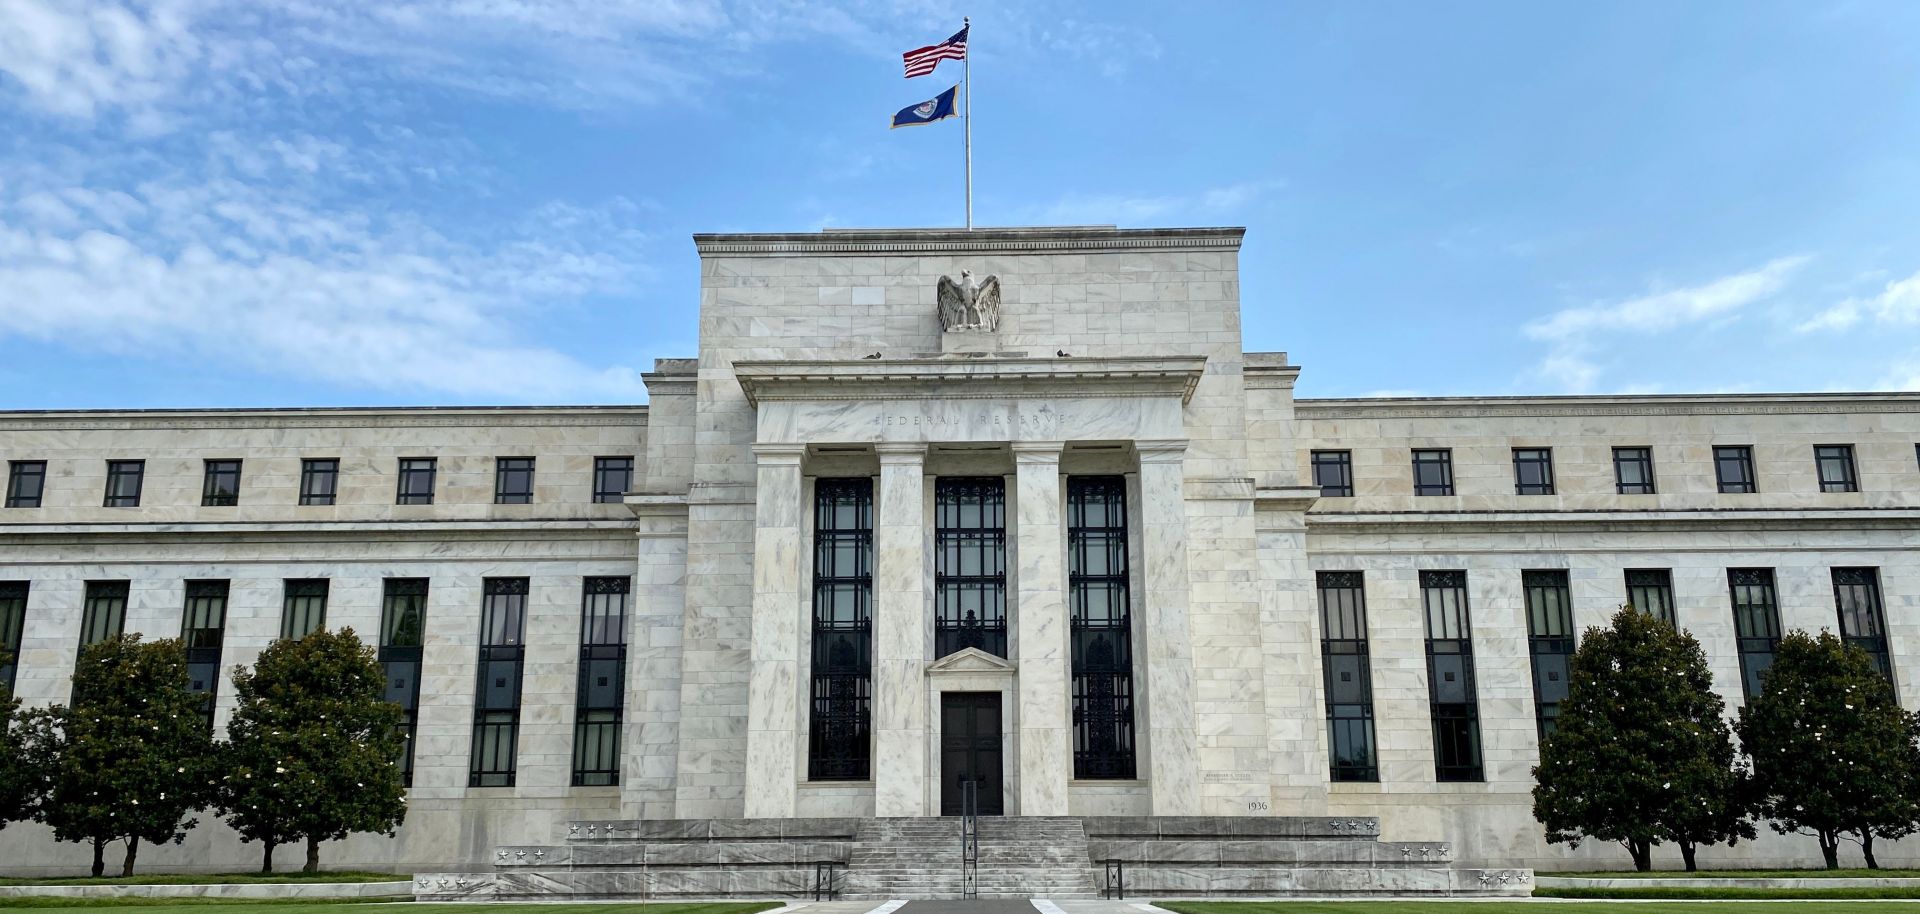 A view looking up at the U.S. Federal Reserve building in Washington D.C. on July 1, 2020.